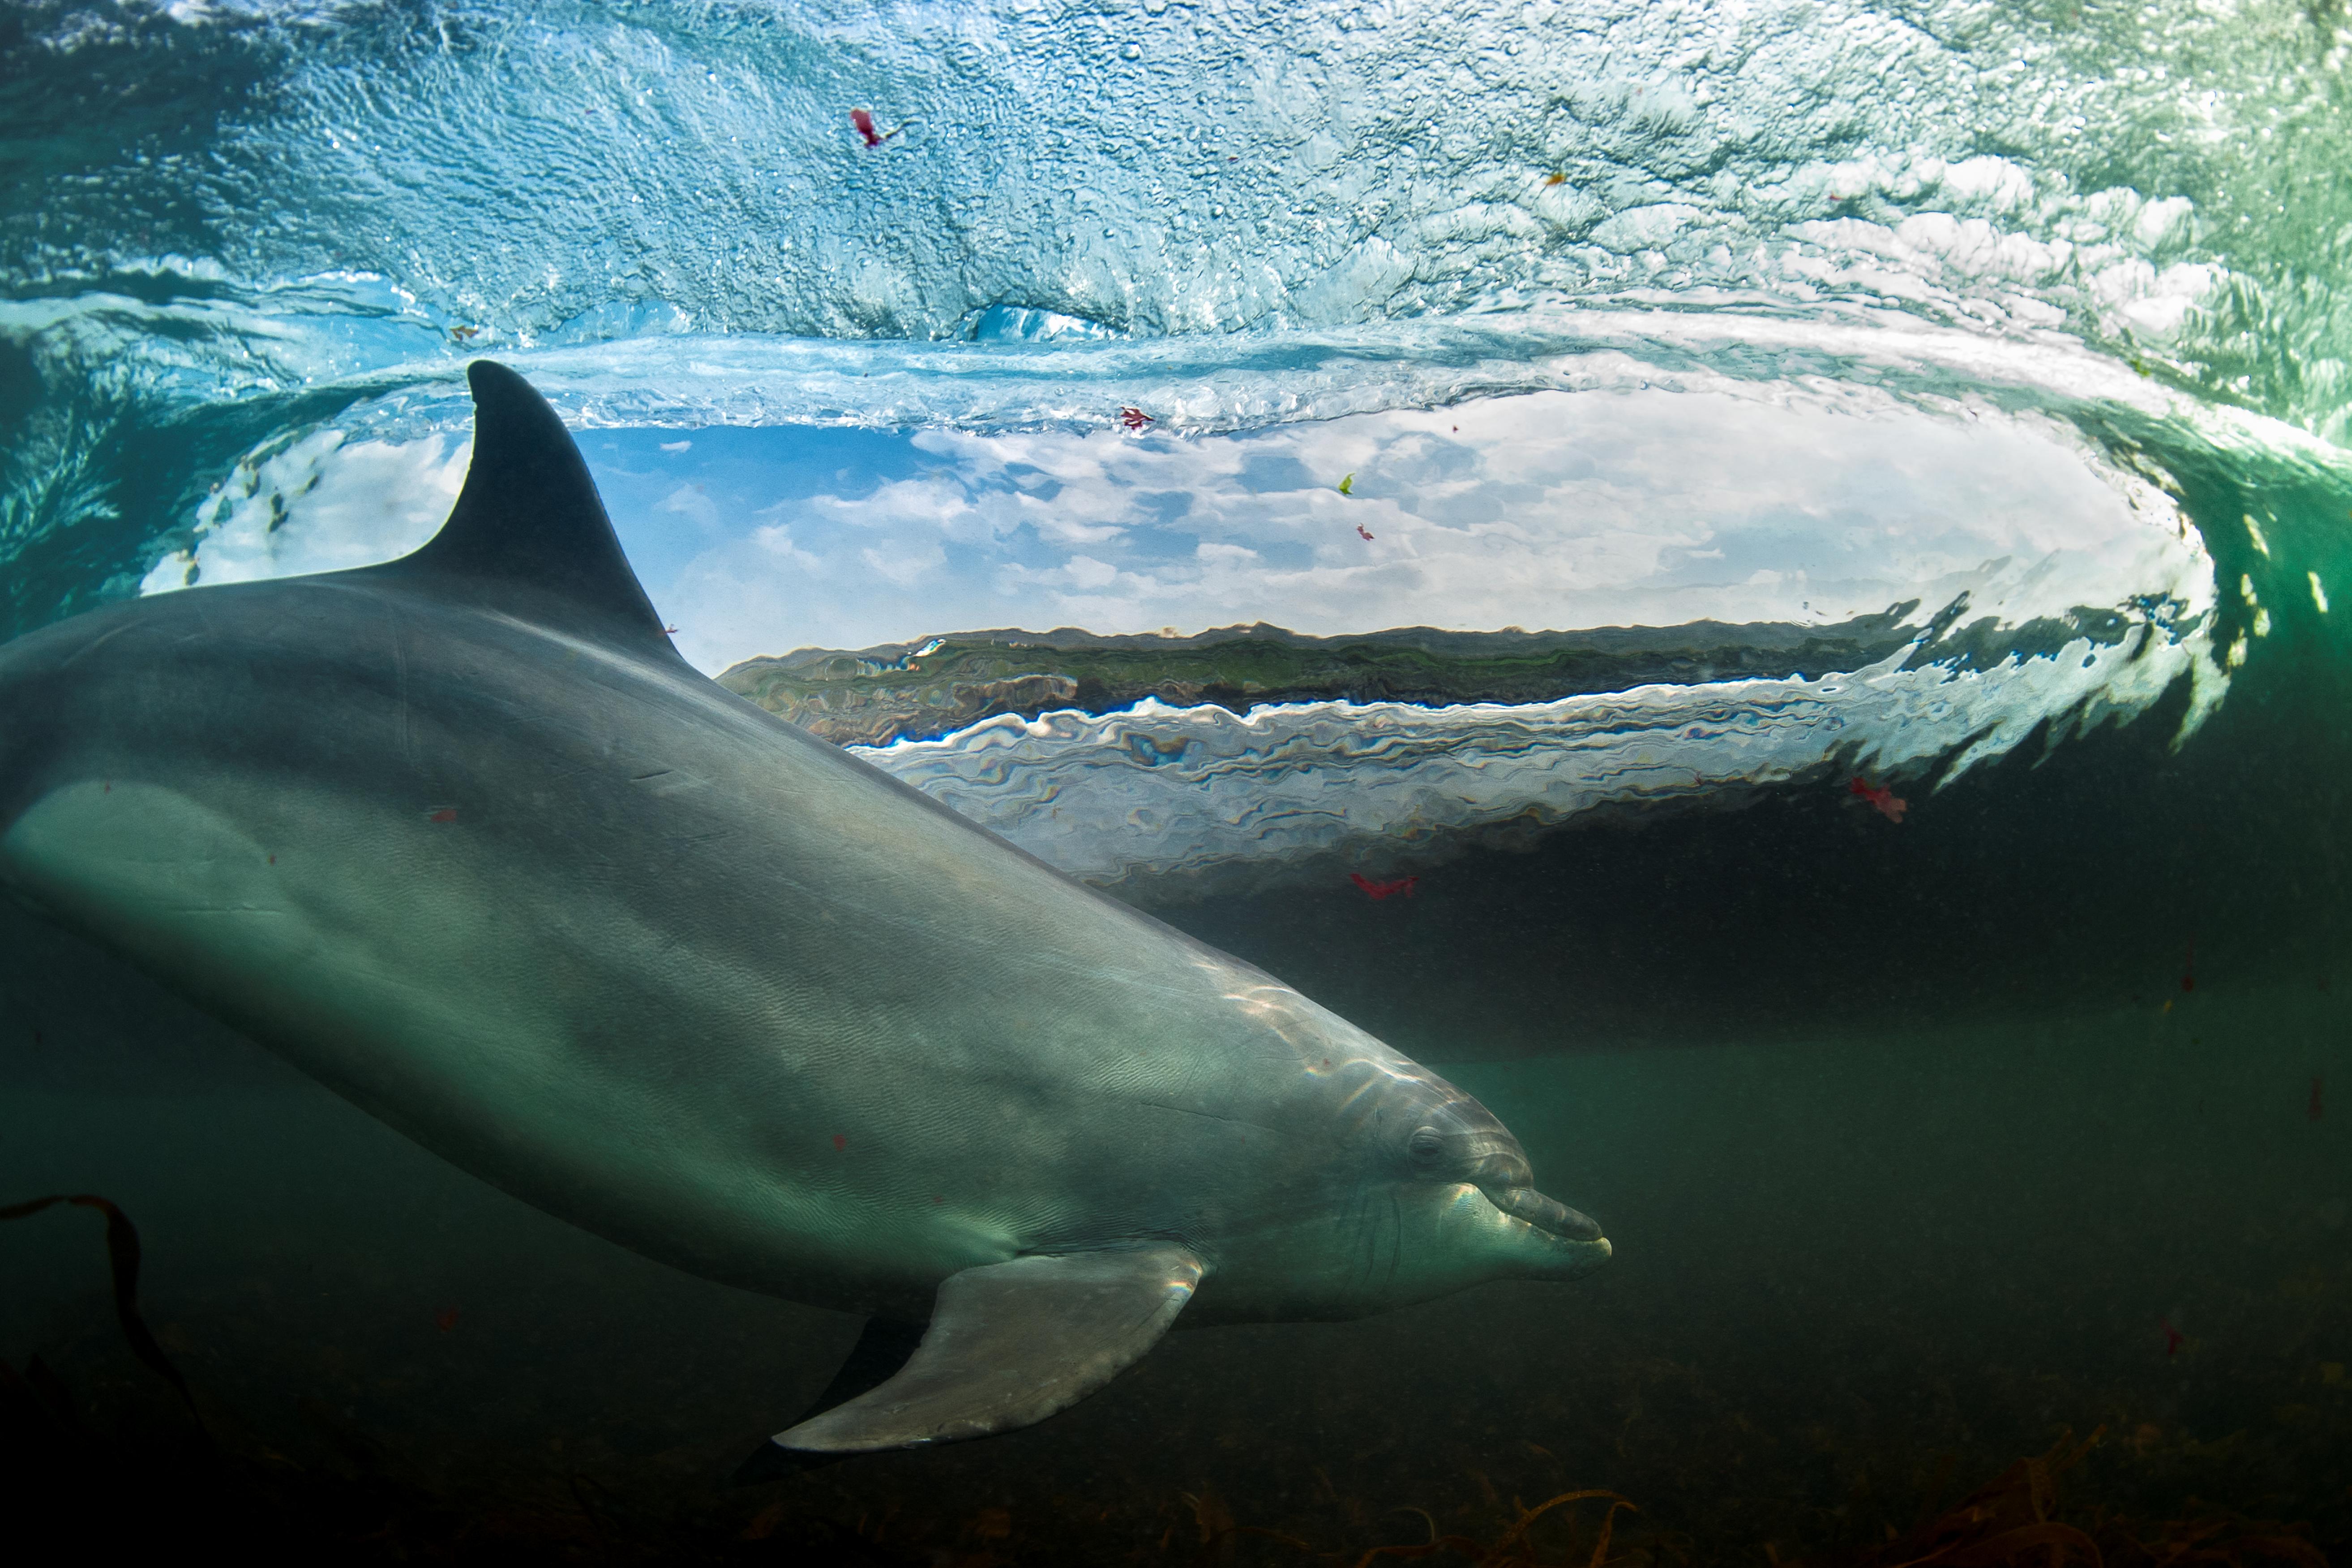 Wed dolphin surfing by George Karbus winner of RSWT photo comp 2013